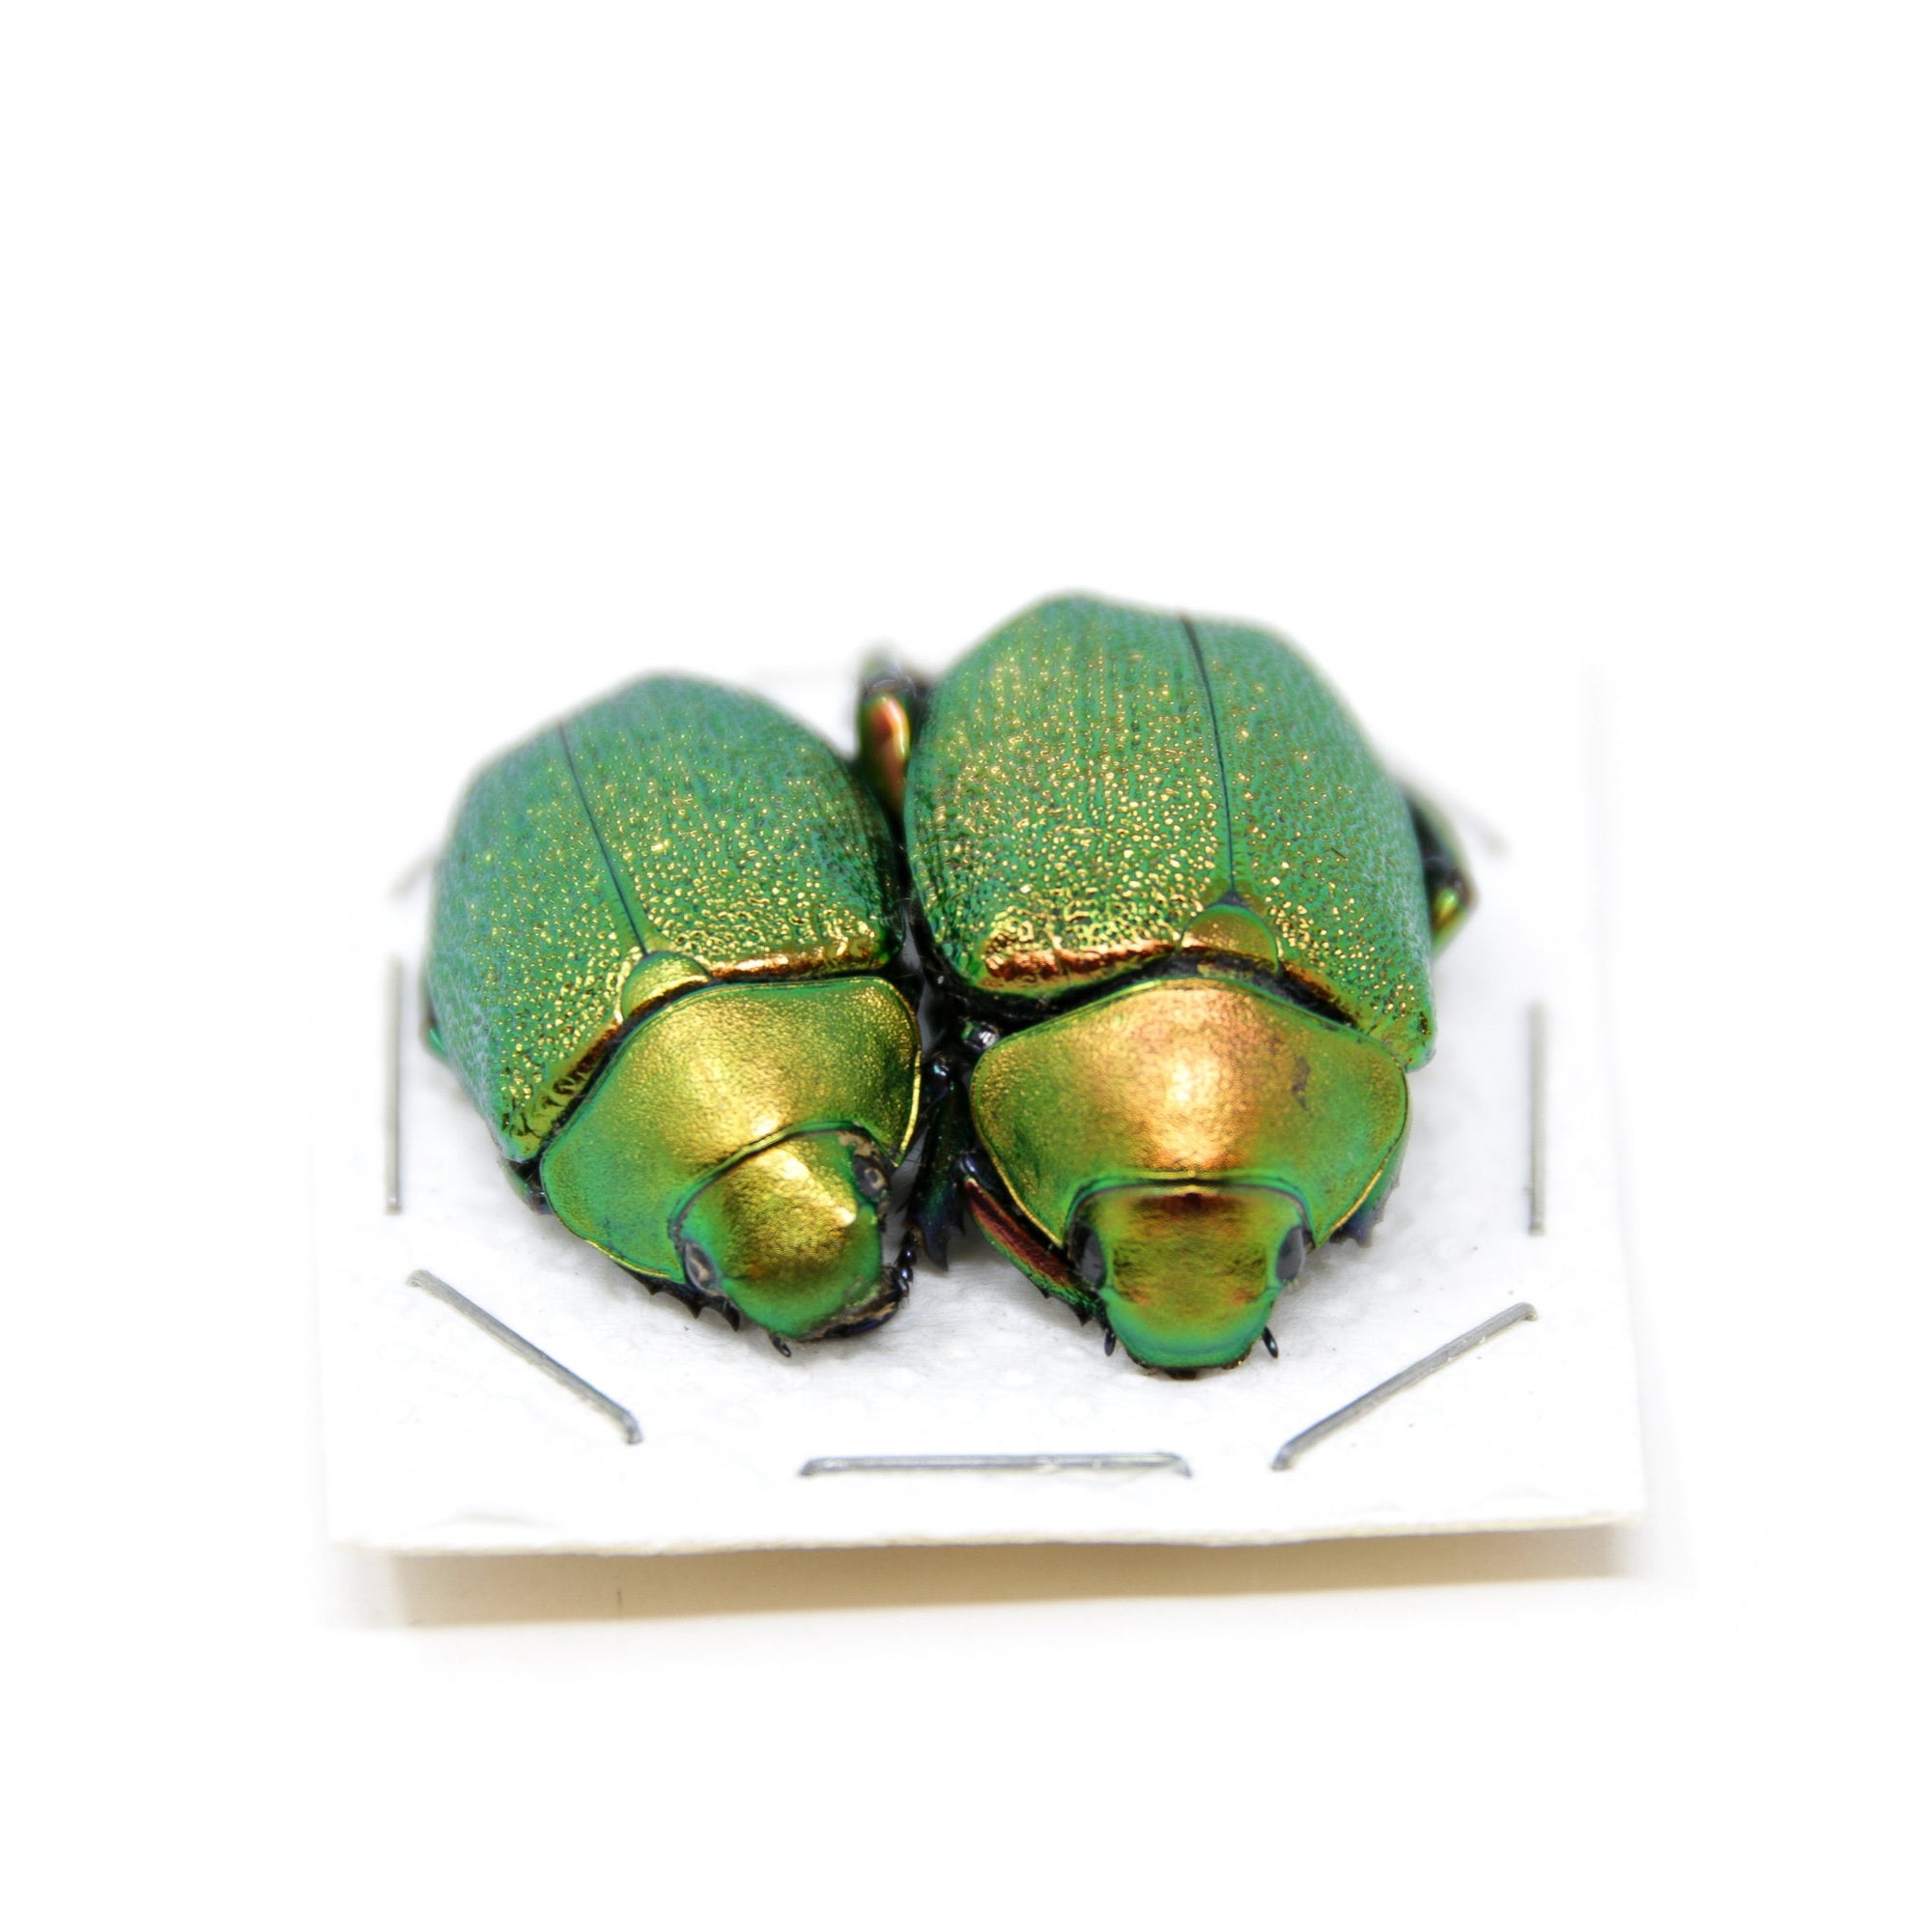 A Pair of Jewel Scarabs (Chrysophora chrysochlora) PERU Real Insect Specimens | Unmounted Taxidermied Bugs